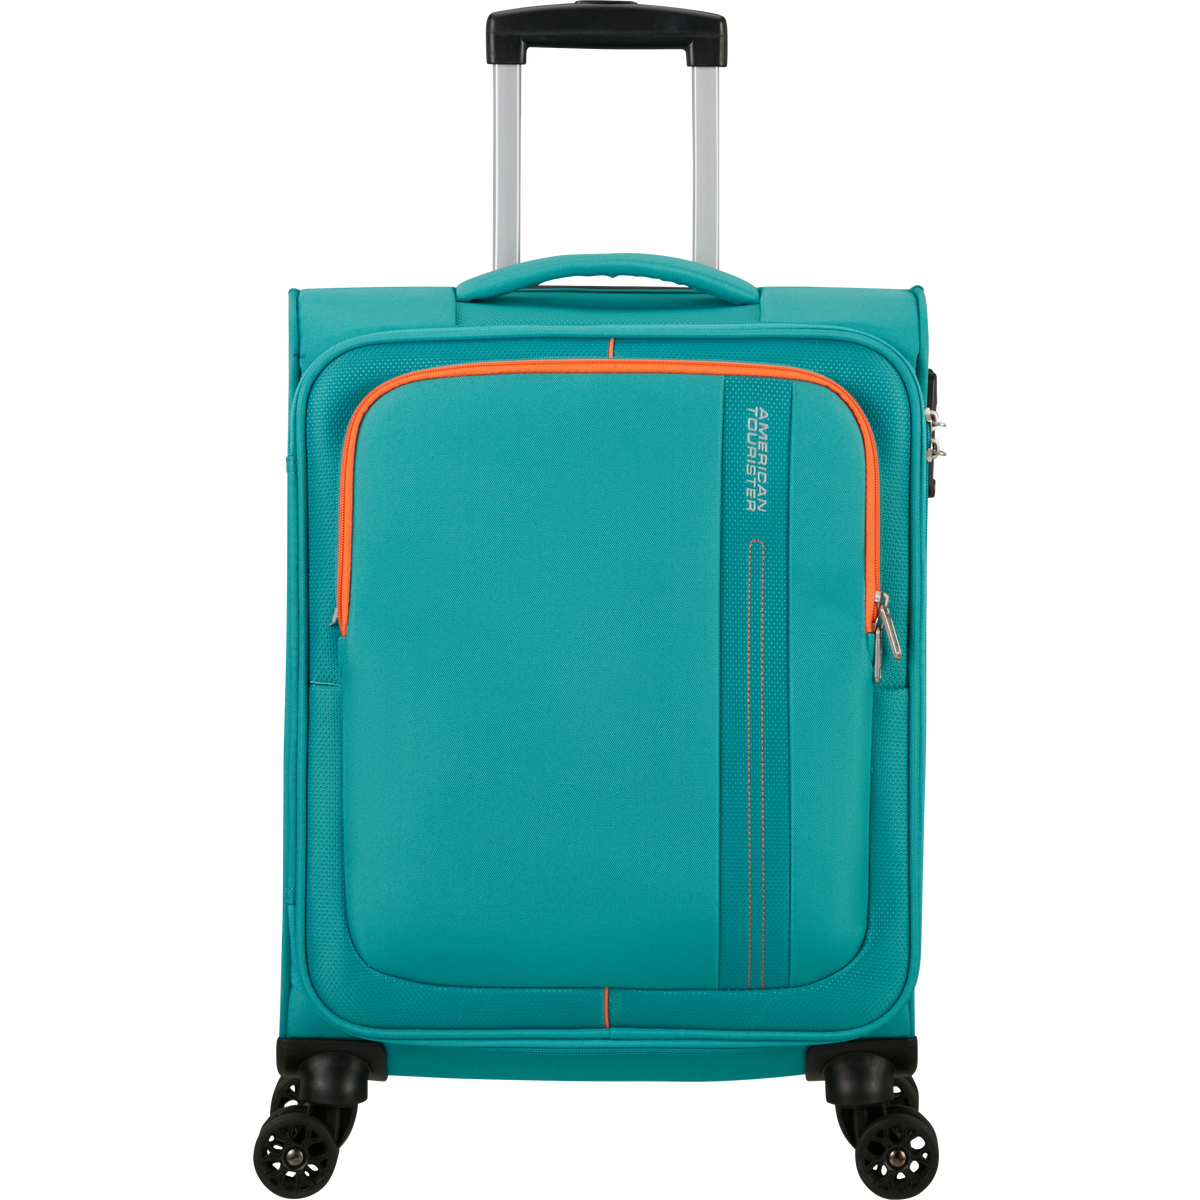 American Tourister Summer Square 55cm Cabin Suitcase at Luggage Superstore